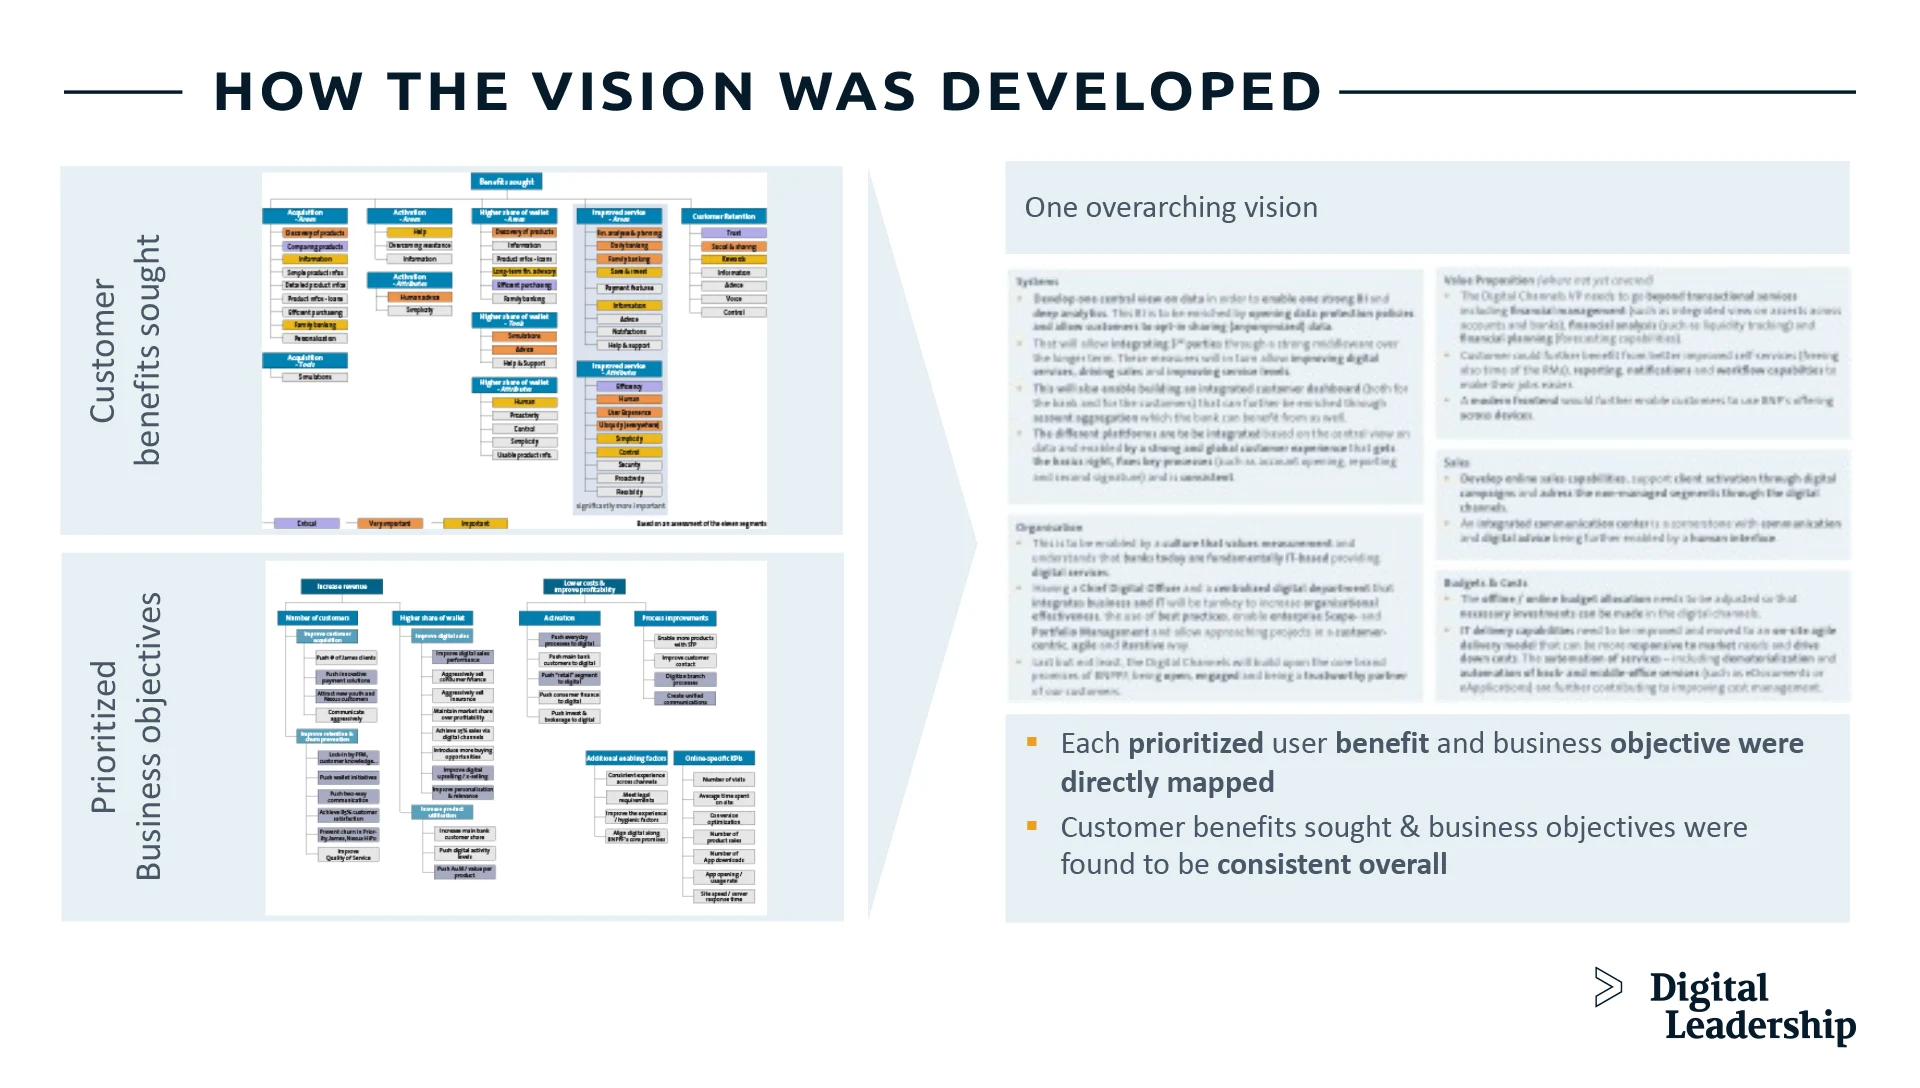 How the Digital Transformation Vision was Developed?